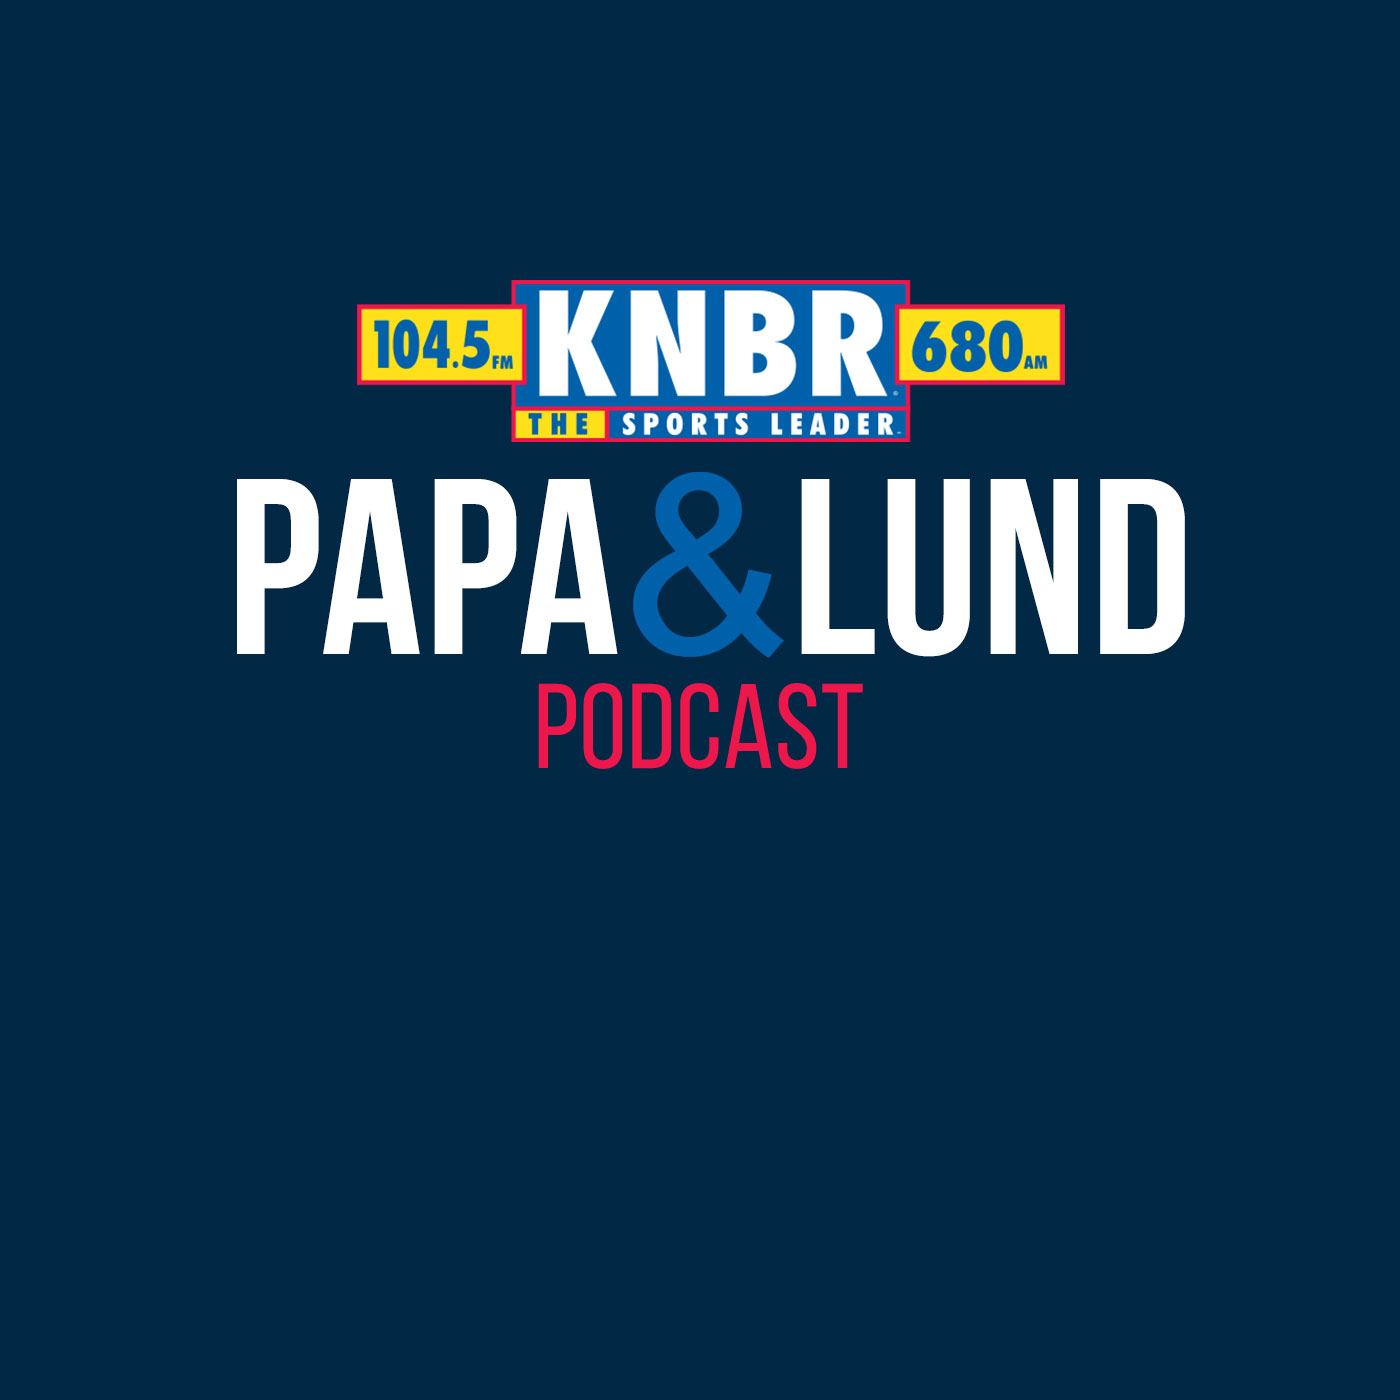 11-8 Mark Jones joins Papa & Lund to preview the early season test for the Warriors at Mile High against the defending NBA Champions and how much CP3 adds to the Warriors controlling the 2nd Unit